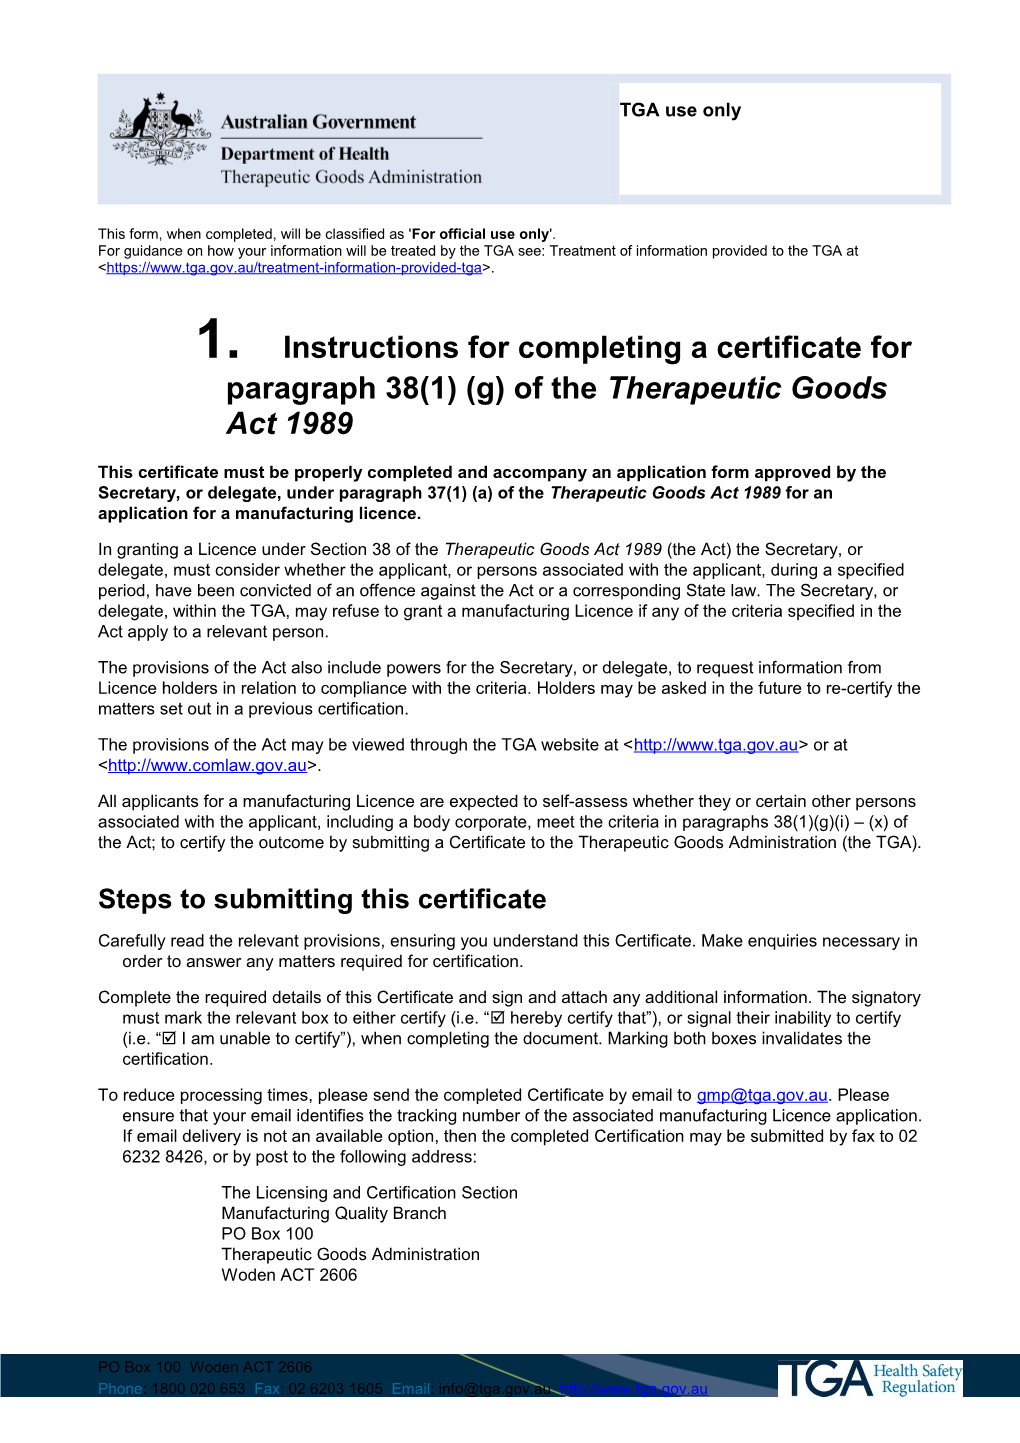 Instructions for Completing a Certificate for Paragraph 38(1) (G) of the Therapeutic Goods